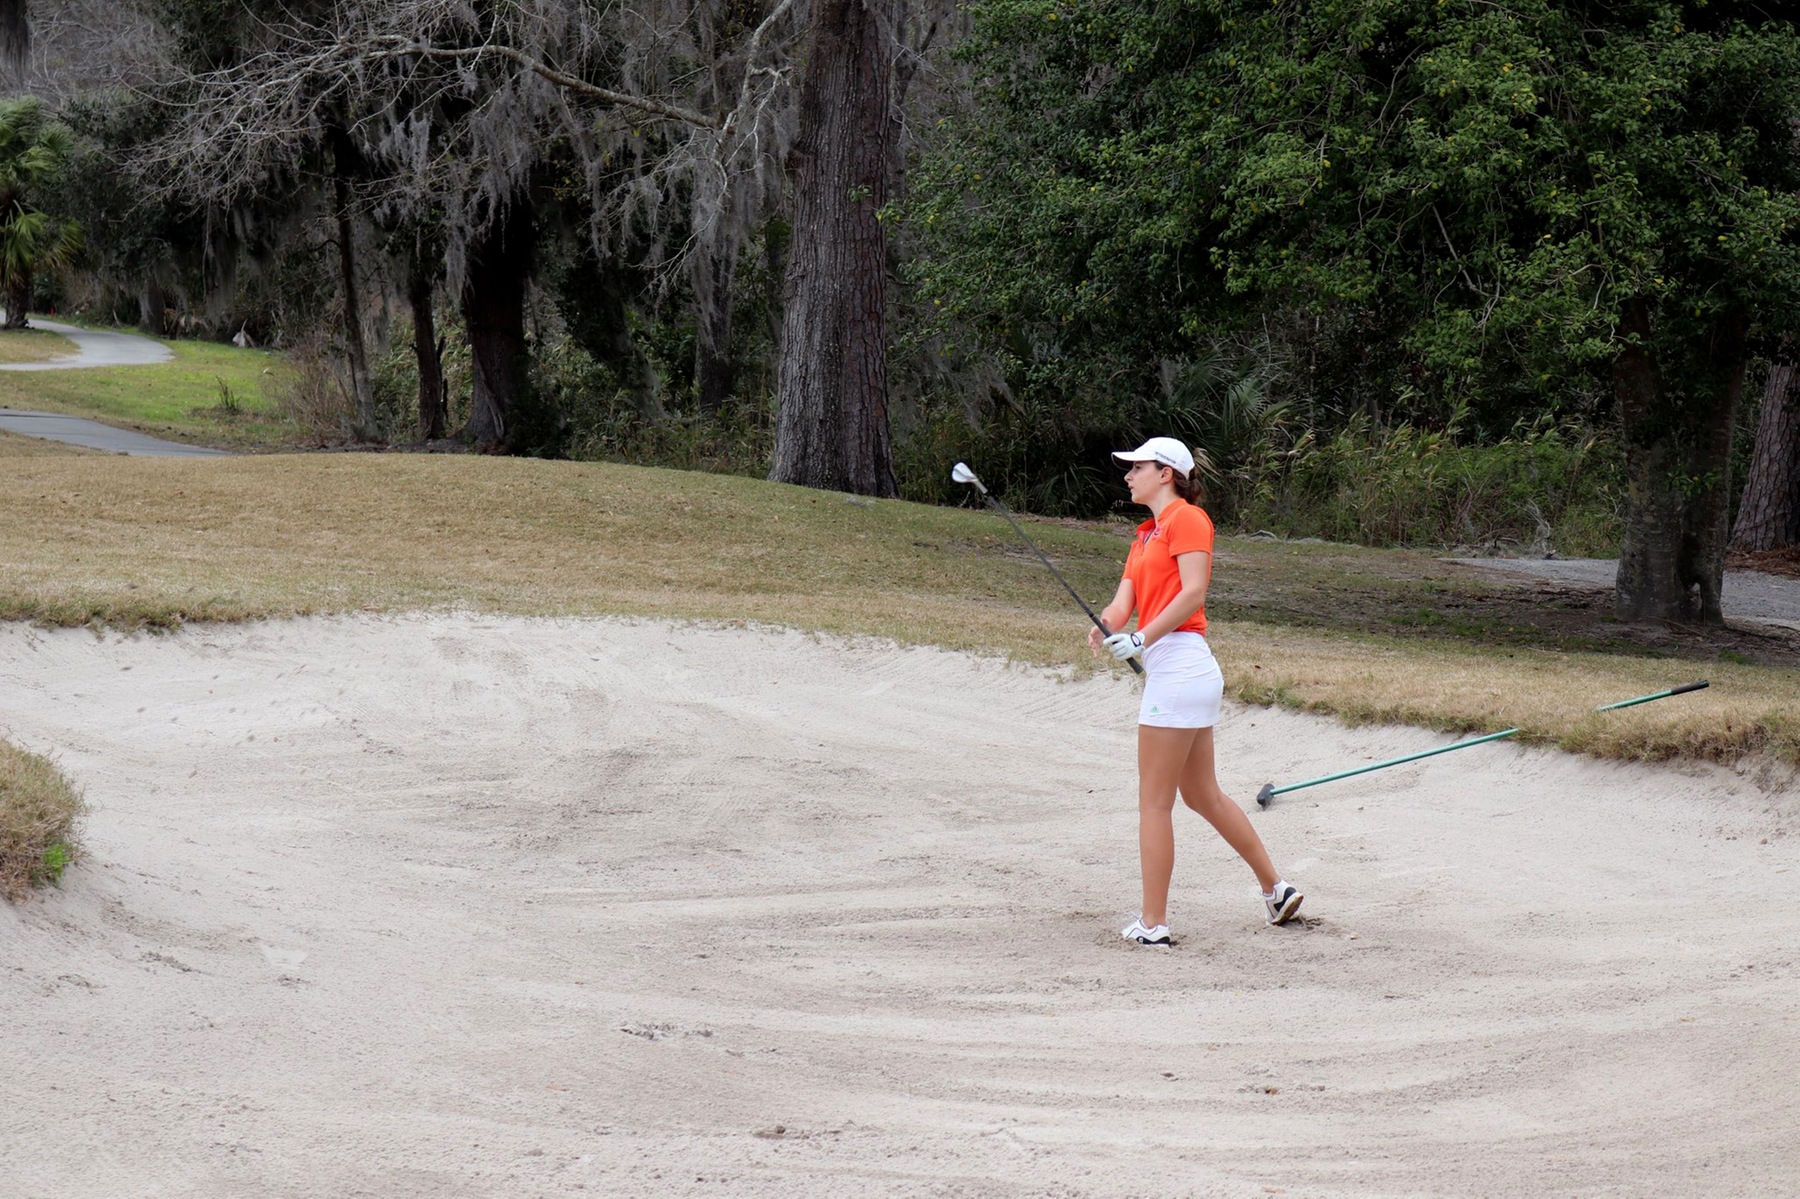 Haughton in first, Eagles second after round one of Bobby Nichols Intercollegiate